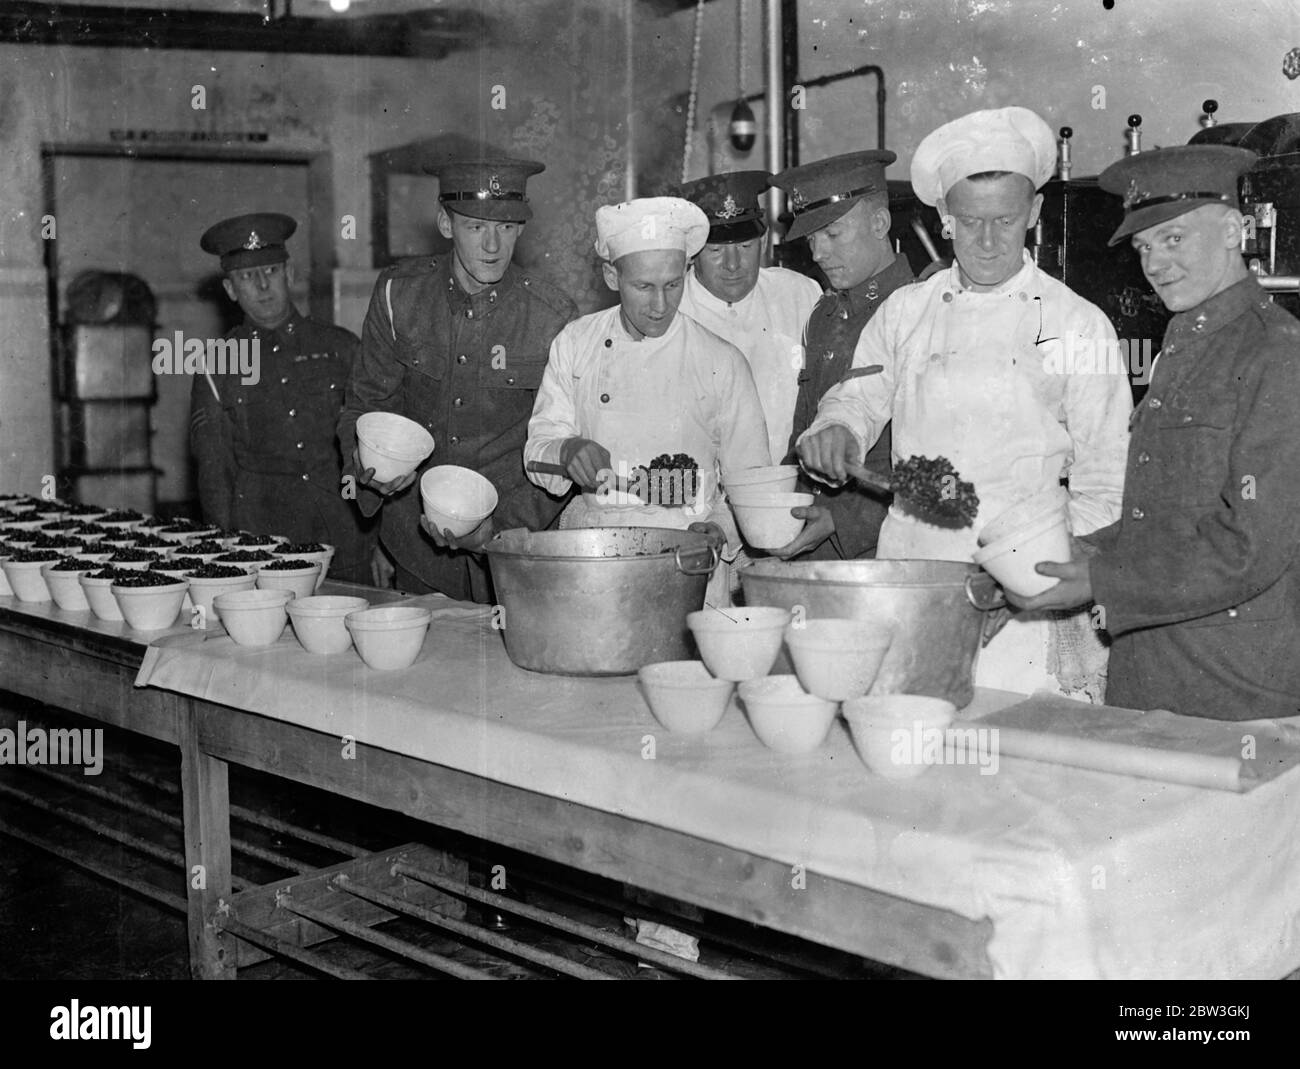 Woolwich barracks troops are making their own christmas pudding . For the first time men of the Royal Artillery at Woolwich Barracks are making their own Christmas puddings instead of buying them from outside . Six hundred men have to be catered for in the messroom and the work of preparing and mixing the puddings has already commenced . Liberal quantities of brand and stout are the most popular ingrediants . Photo shows , Cooks finding willing assistants at the Royal Artillery barracks , Woolwich , when the Christmas puddding column is drawn up on the kitchen table . 7 December 1935 Stock Photo